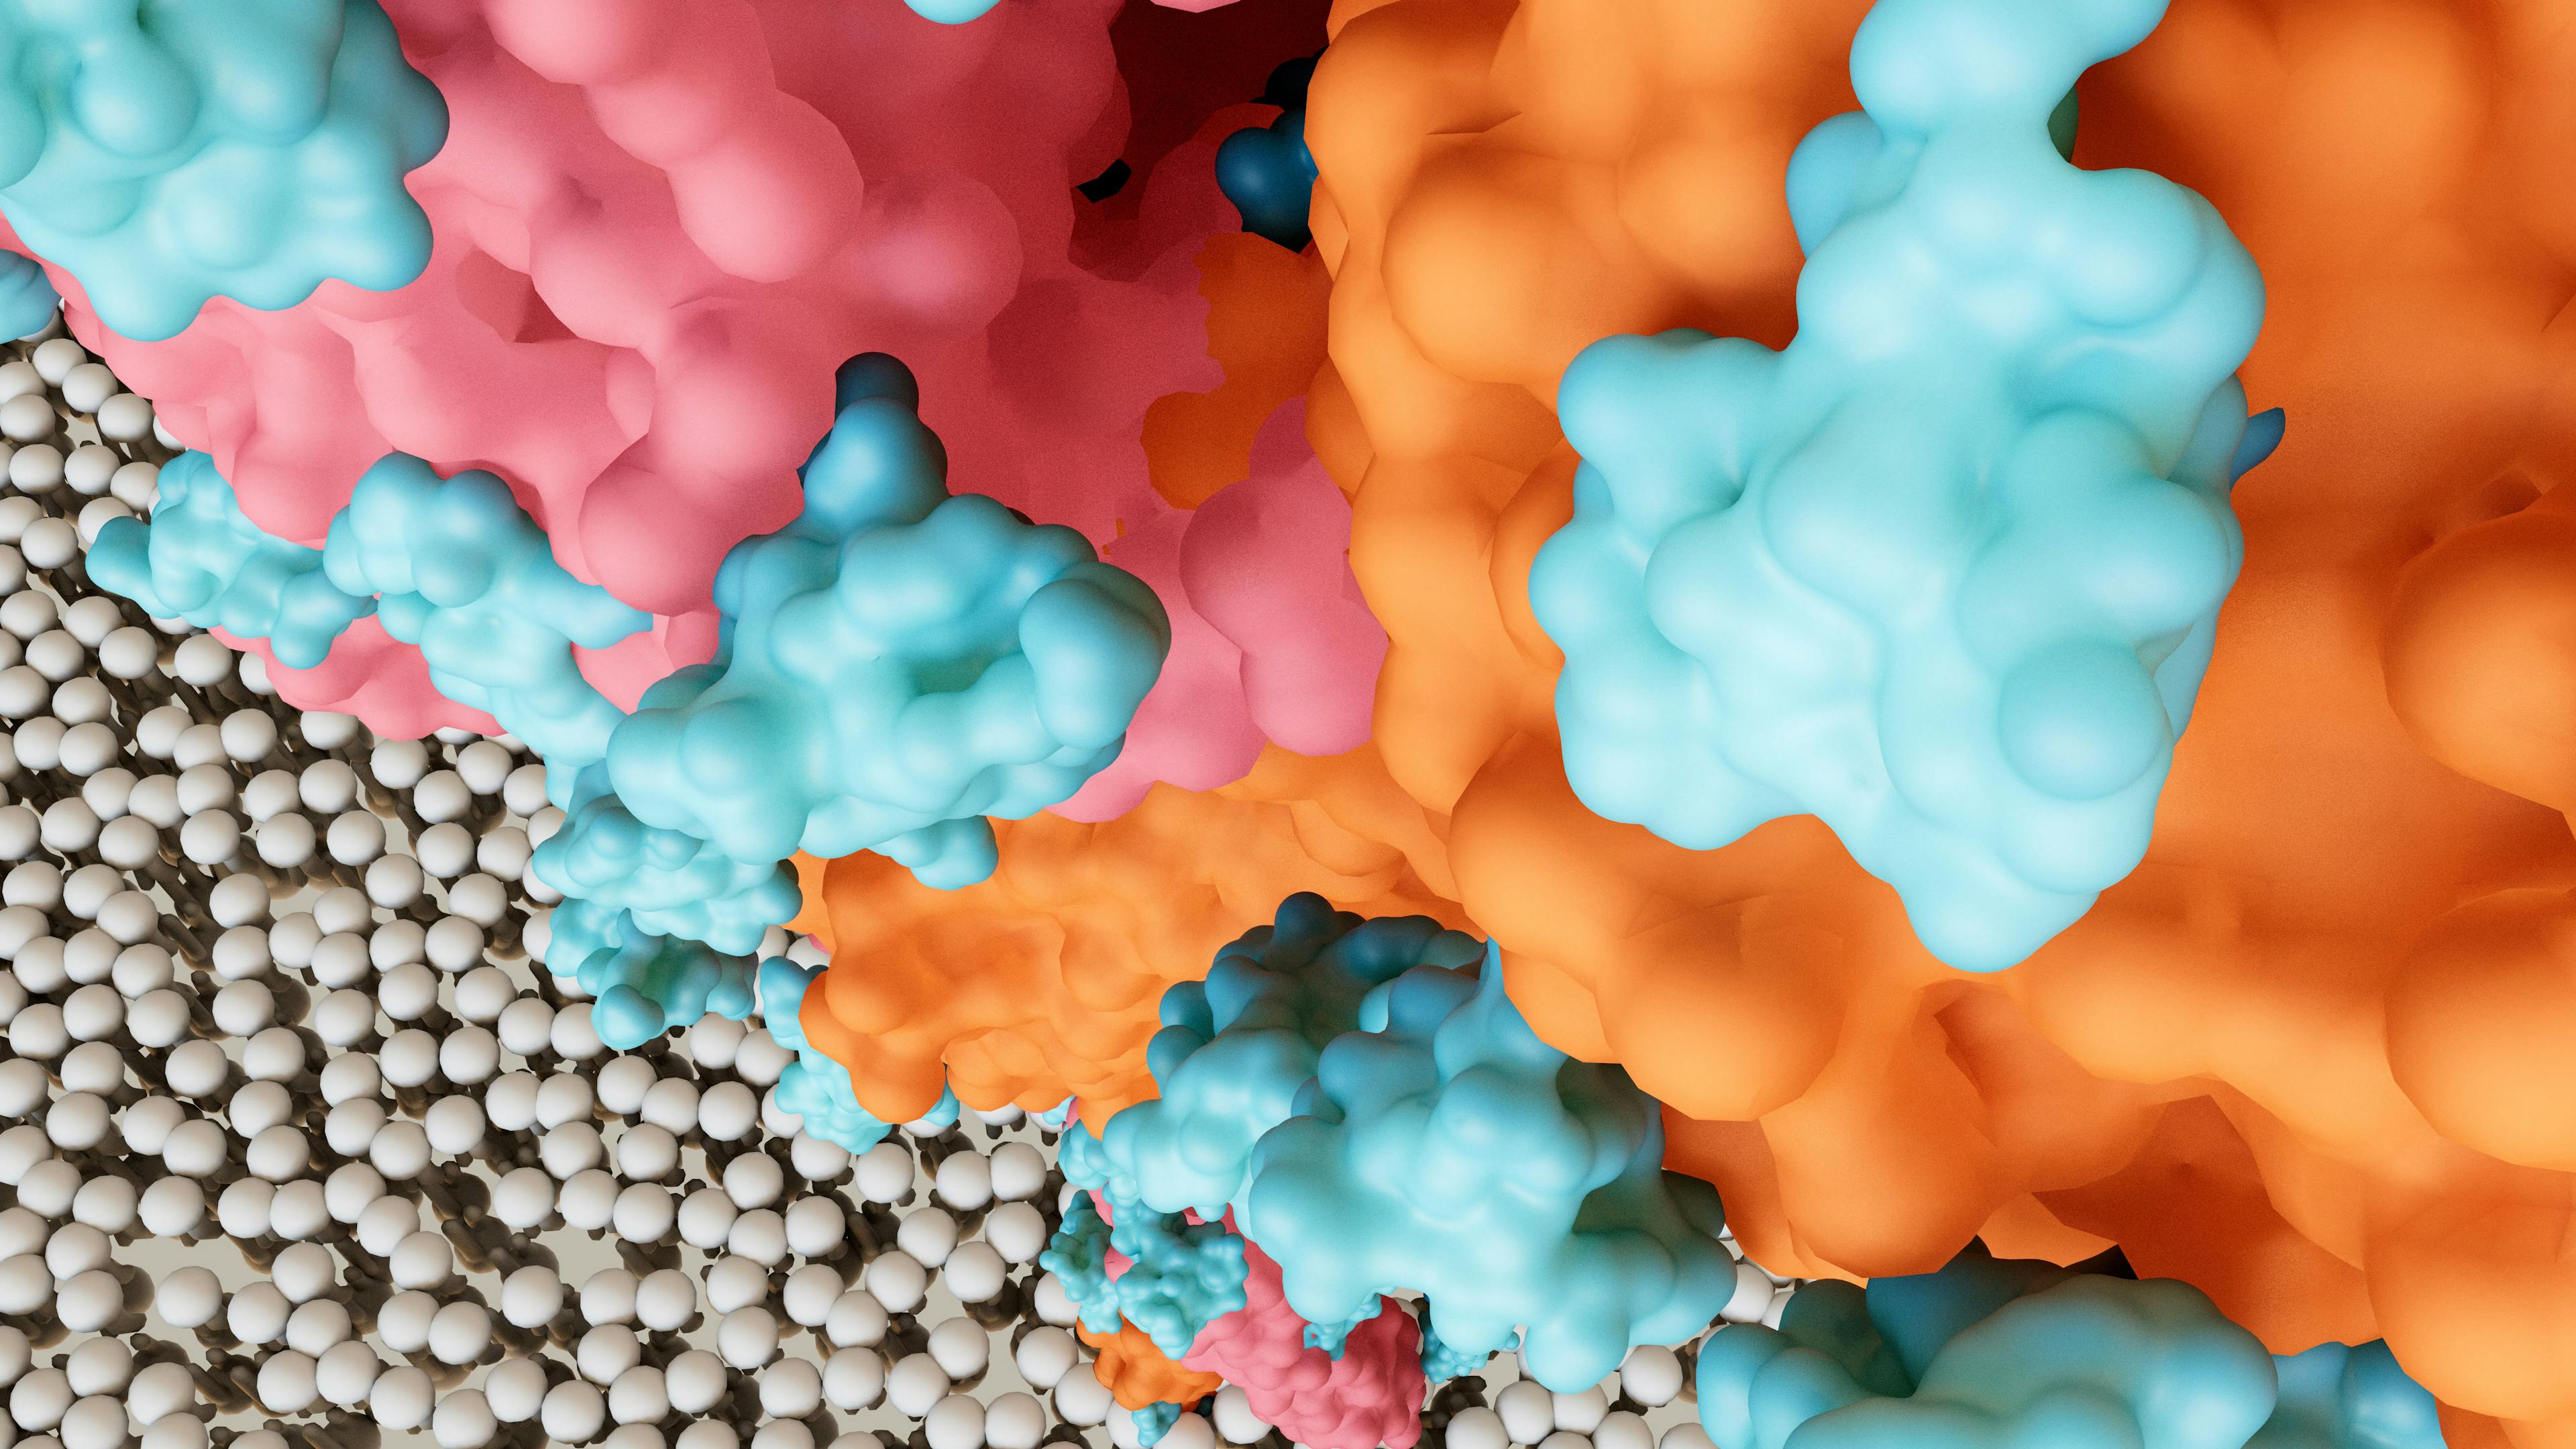 SARS-CoV-2 Spike Protein glycan shield (in blue) thwart the host immune response. Coronavirus structure. | Image Credit: © Design Cells - stock.adobe.com